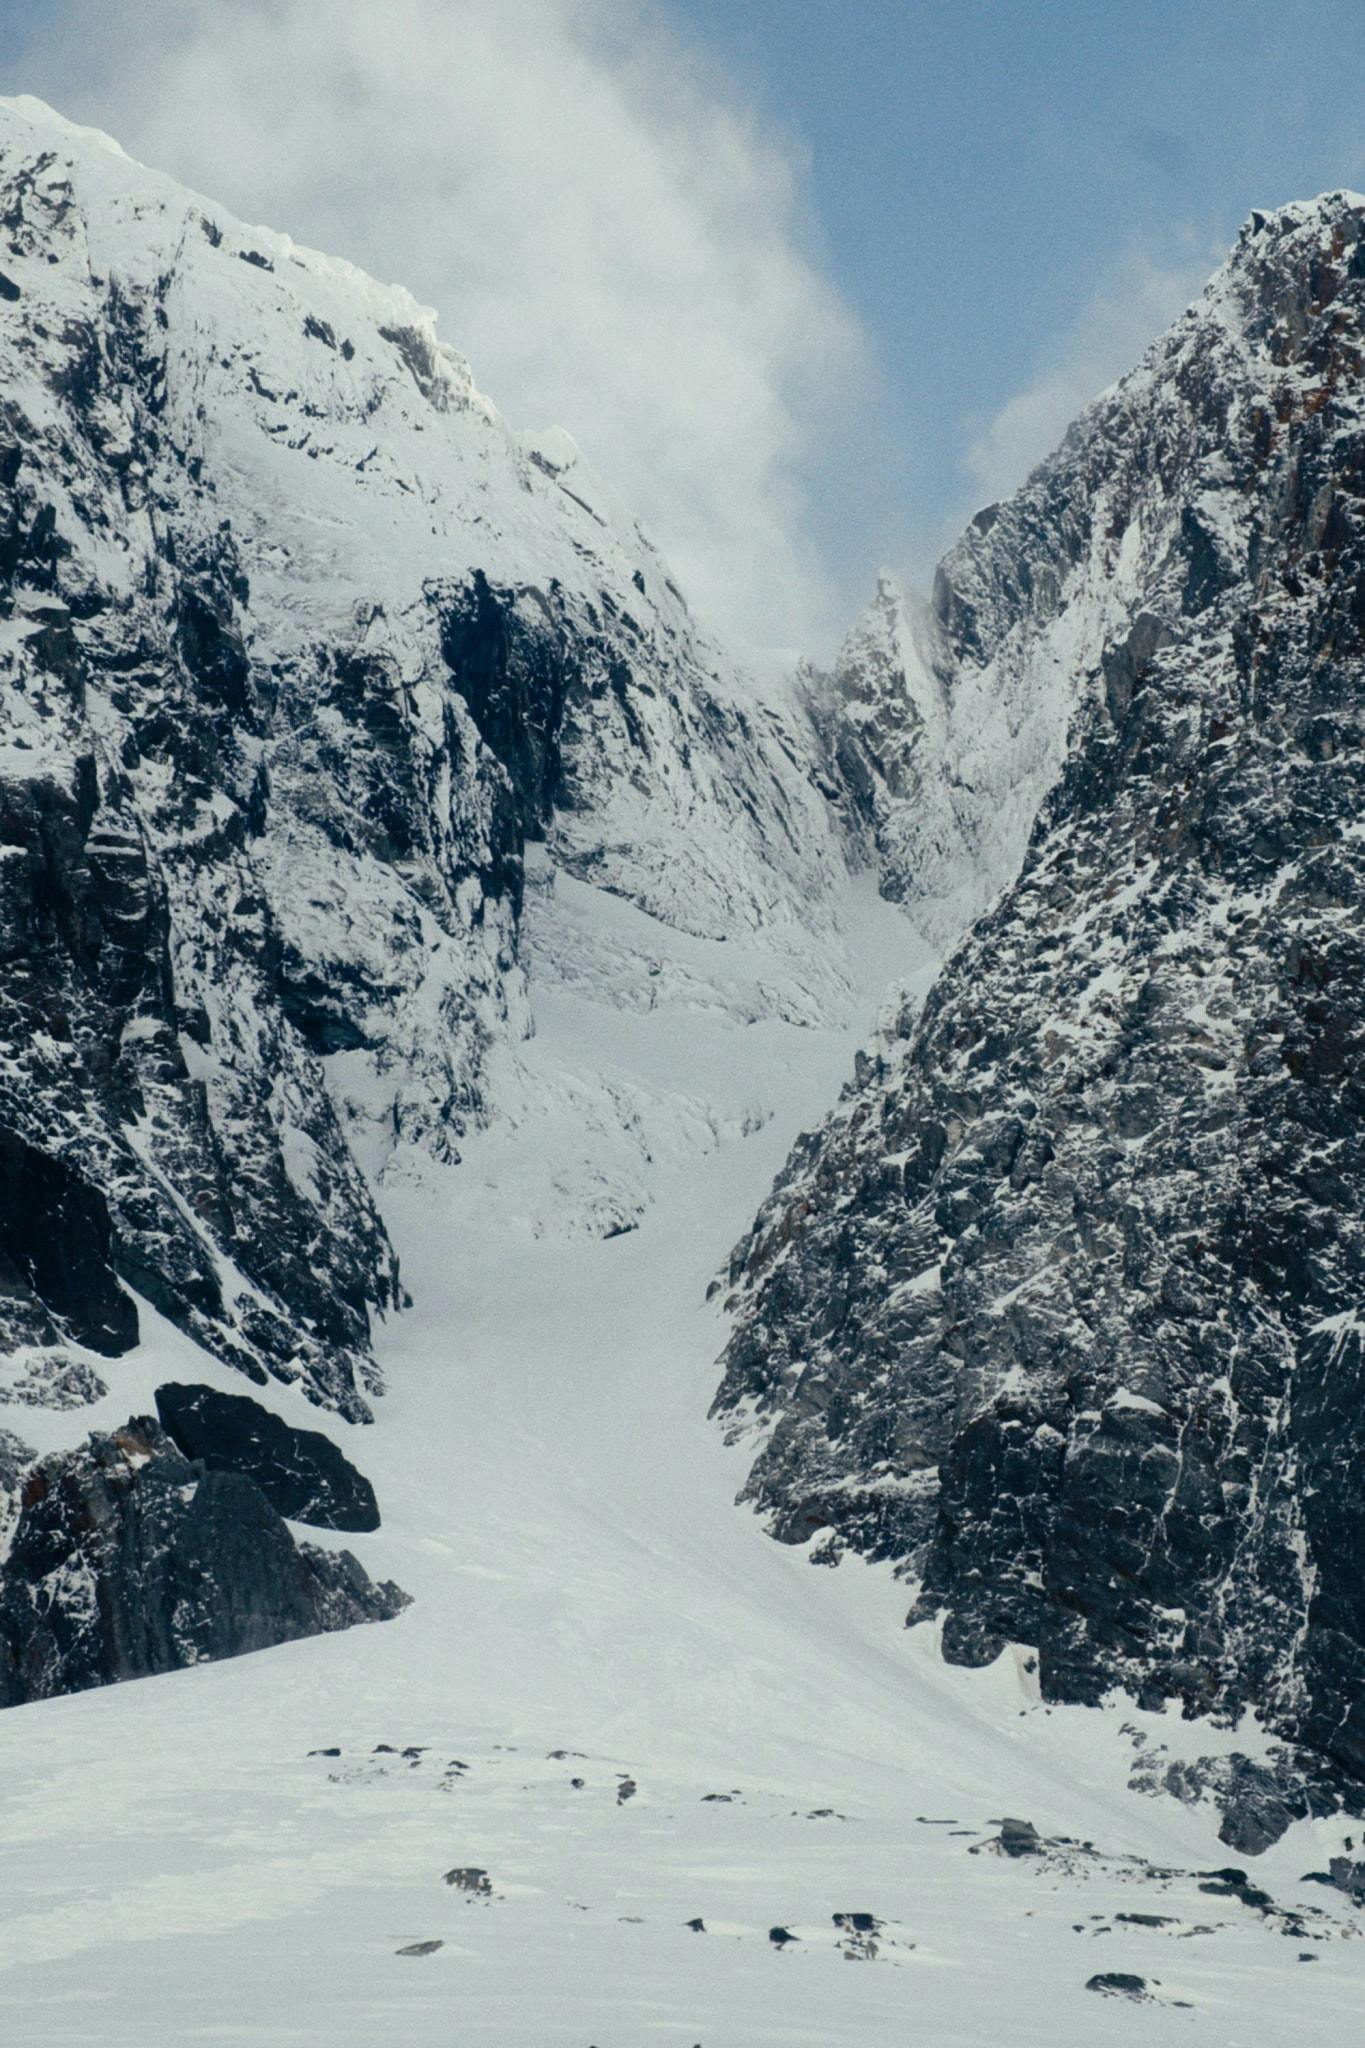 A photo of a rocky, icy couloir